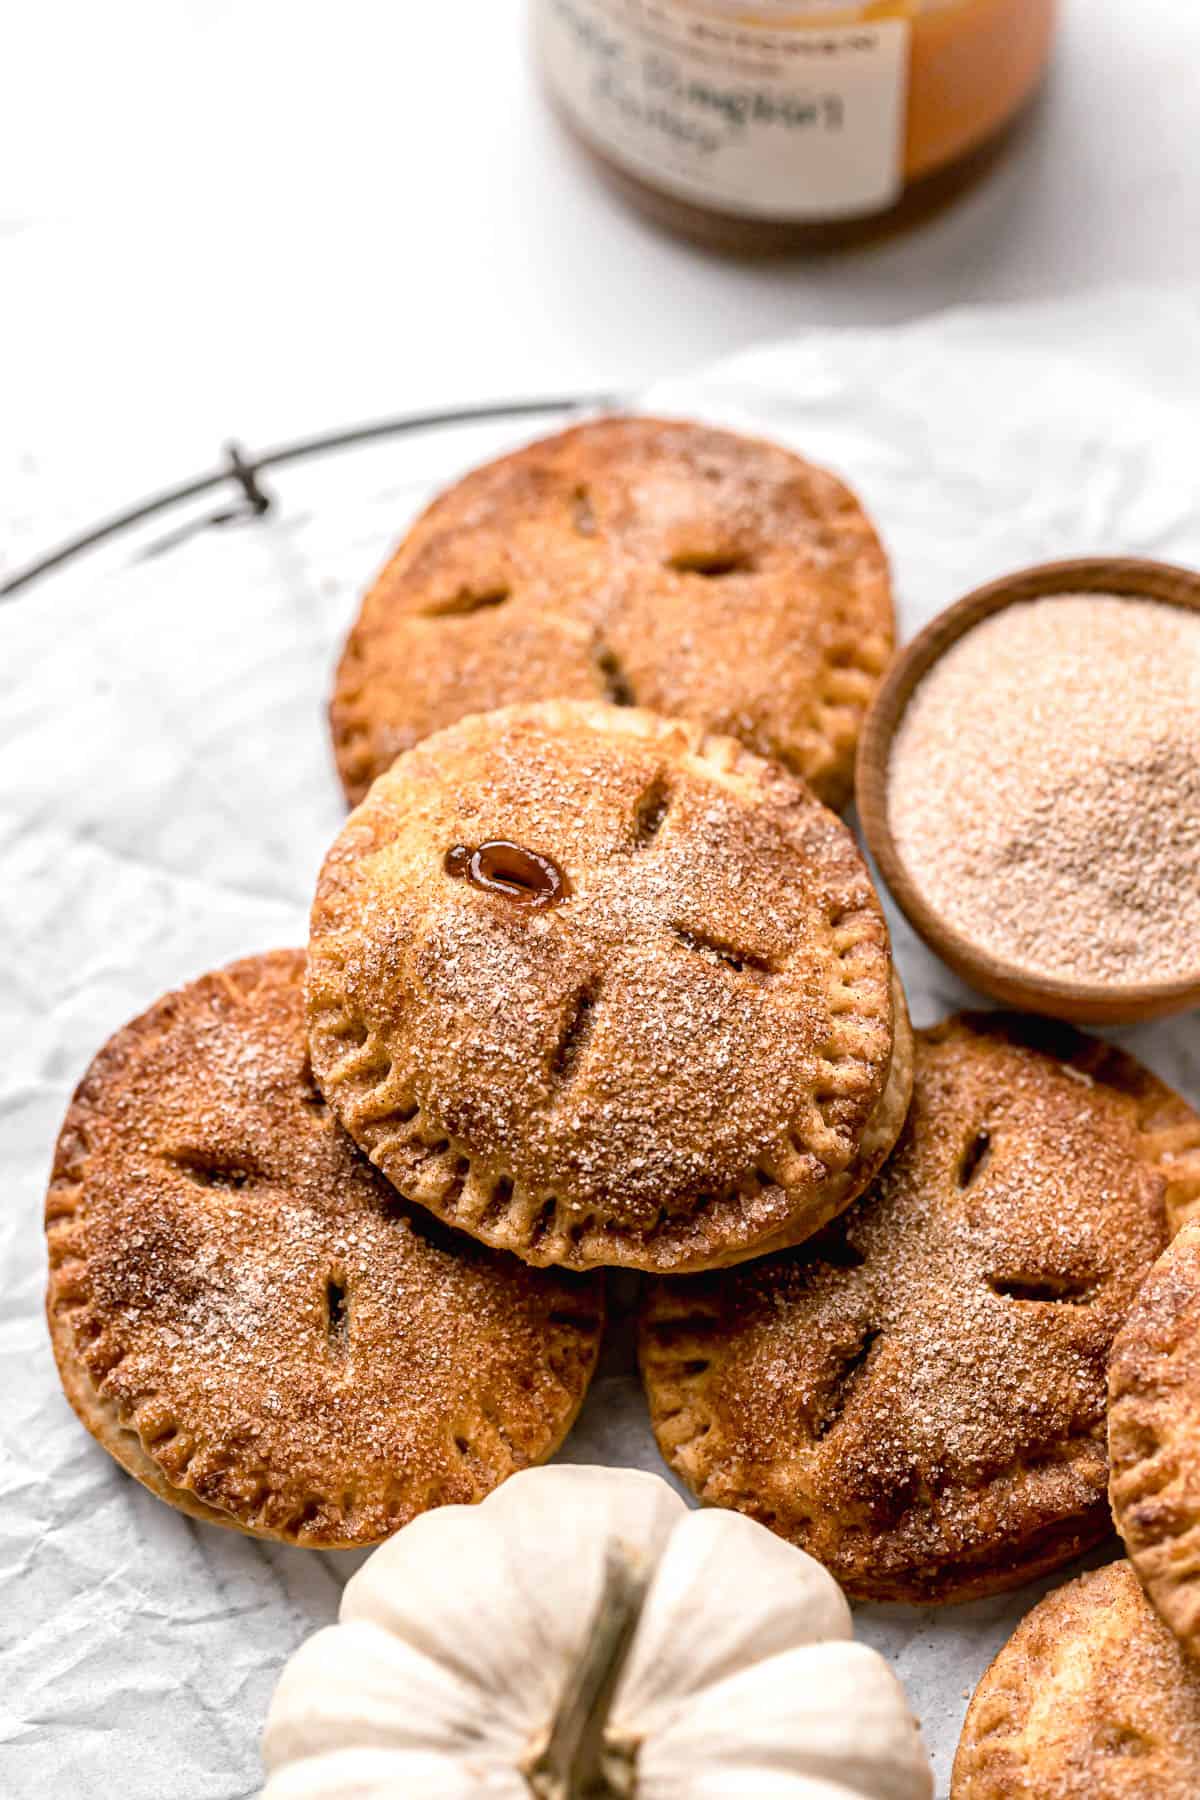 a pile of baked hand pies with filling oozing out on a counter next to a bowl of cinnamon sugar and a white pumpkin